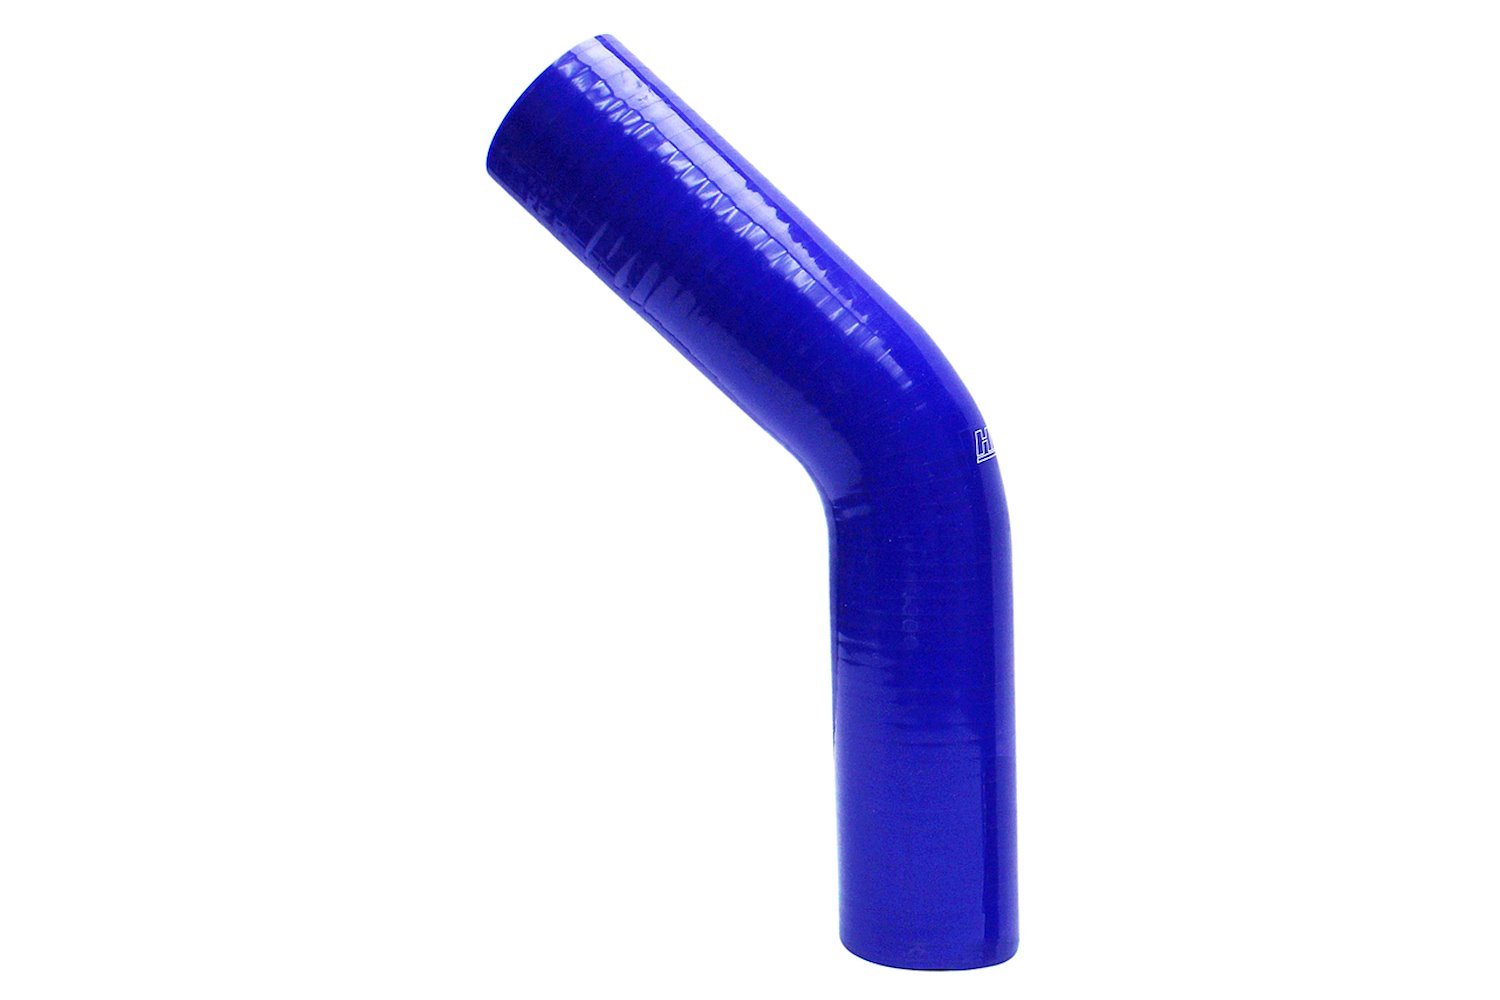 HTSEC45-275-BLUE Silicone 45-Degree Elbow Coupler Hose, High-Temp 4-Ply Reinforced, 2-3/4 in. ID, Blue